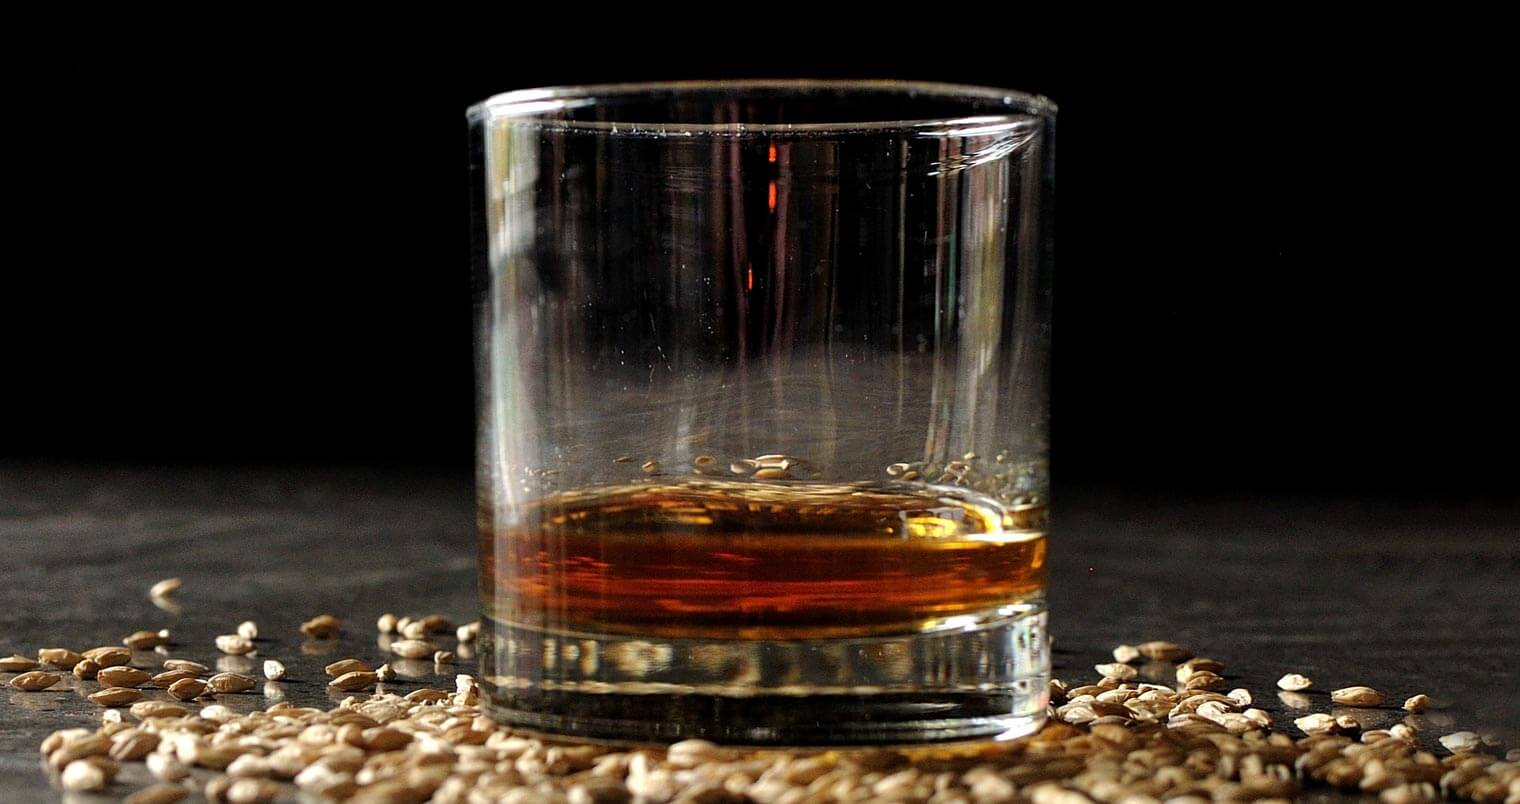 Westward Whiskey Glass and barley, featured image